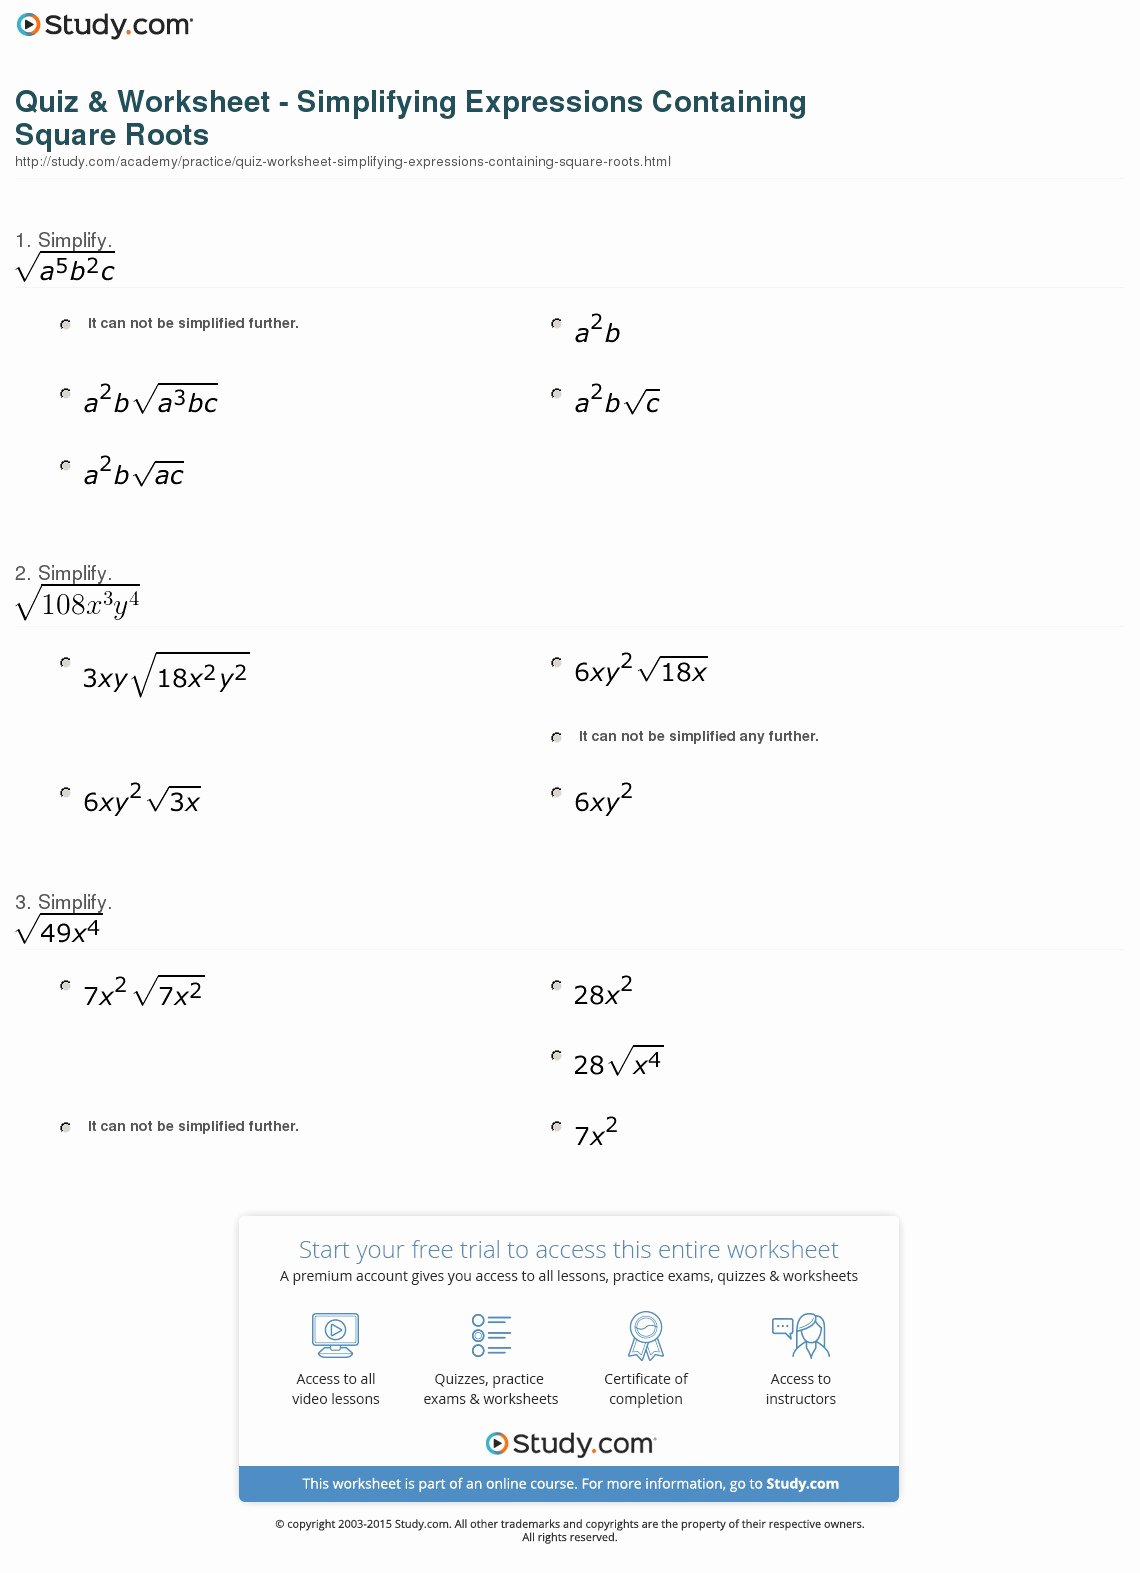 Square Root Practice Worksheet Lovely Quiz &amp; Worksheet Simplifying Expressions Containing